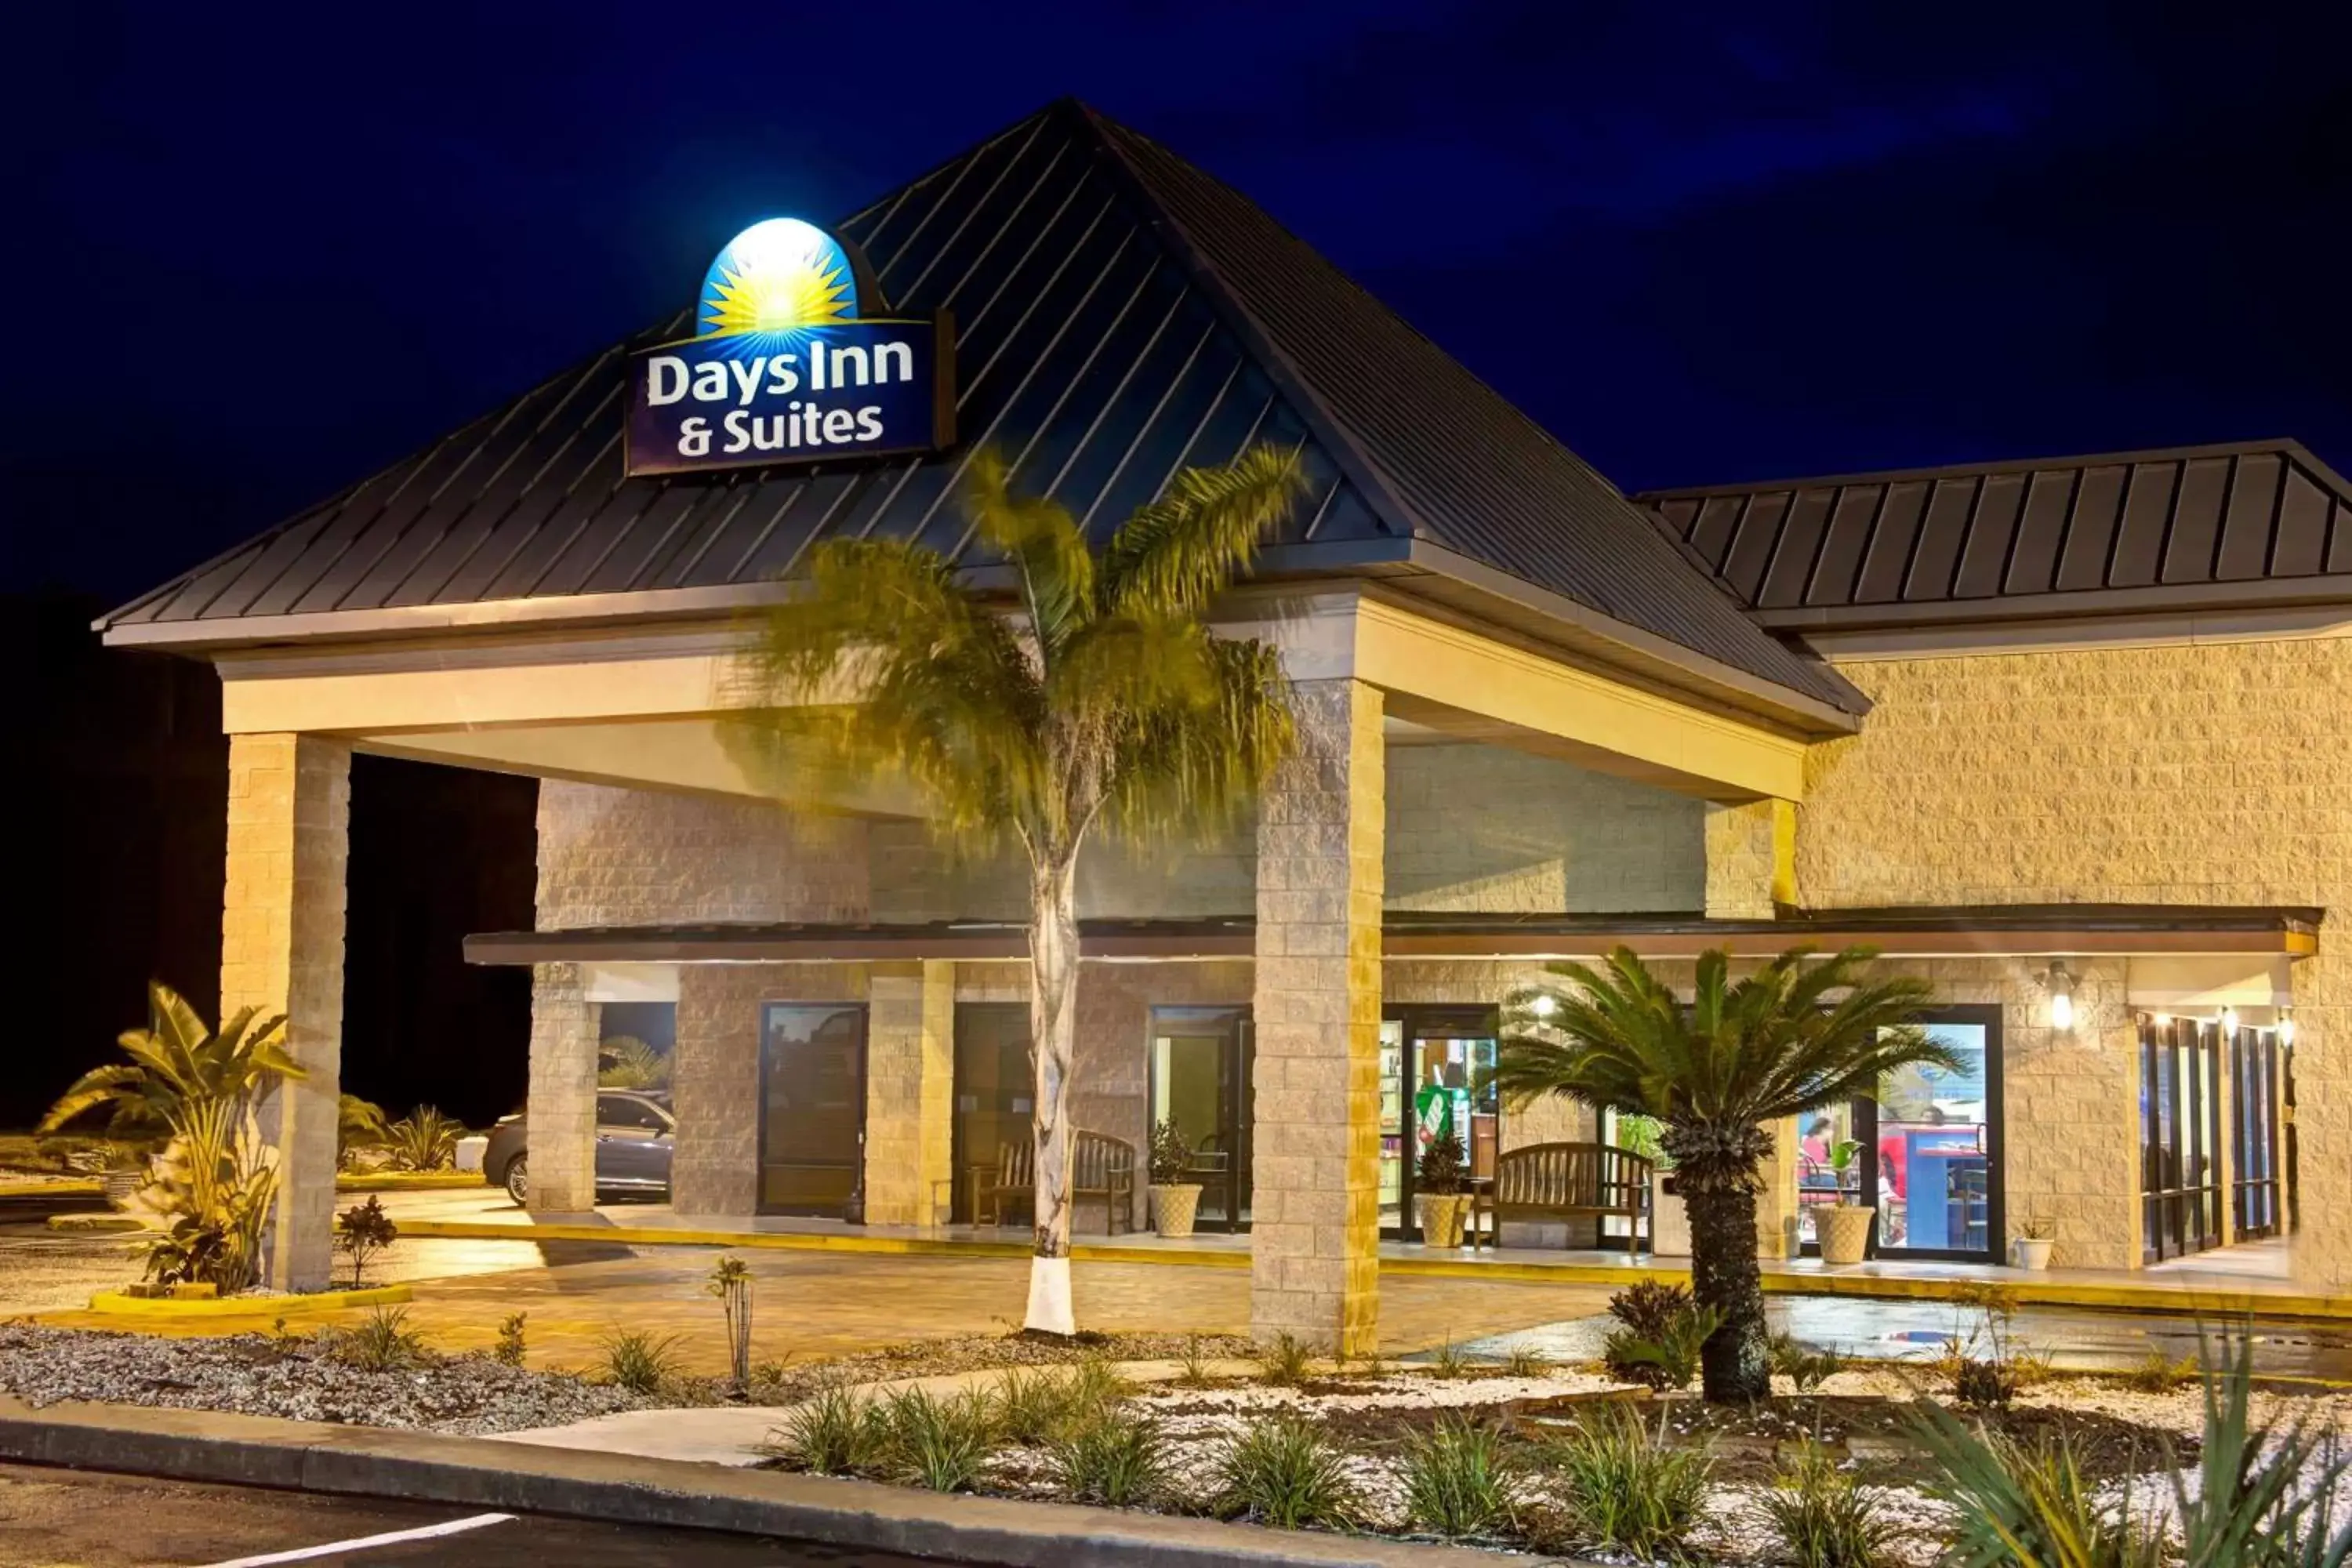 Property Building in Days Inn & Suites by Wyndham Davenport